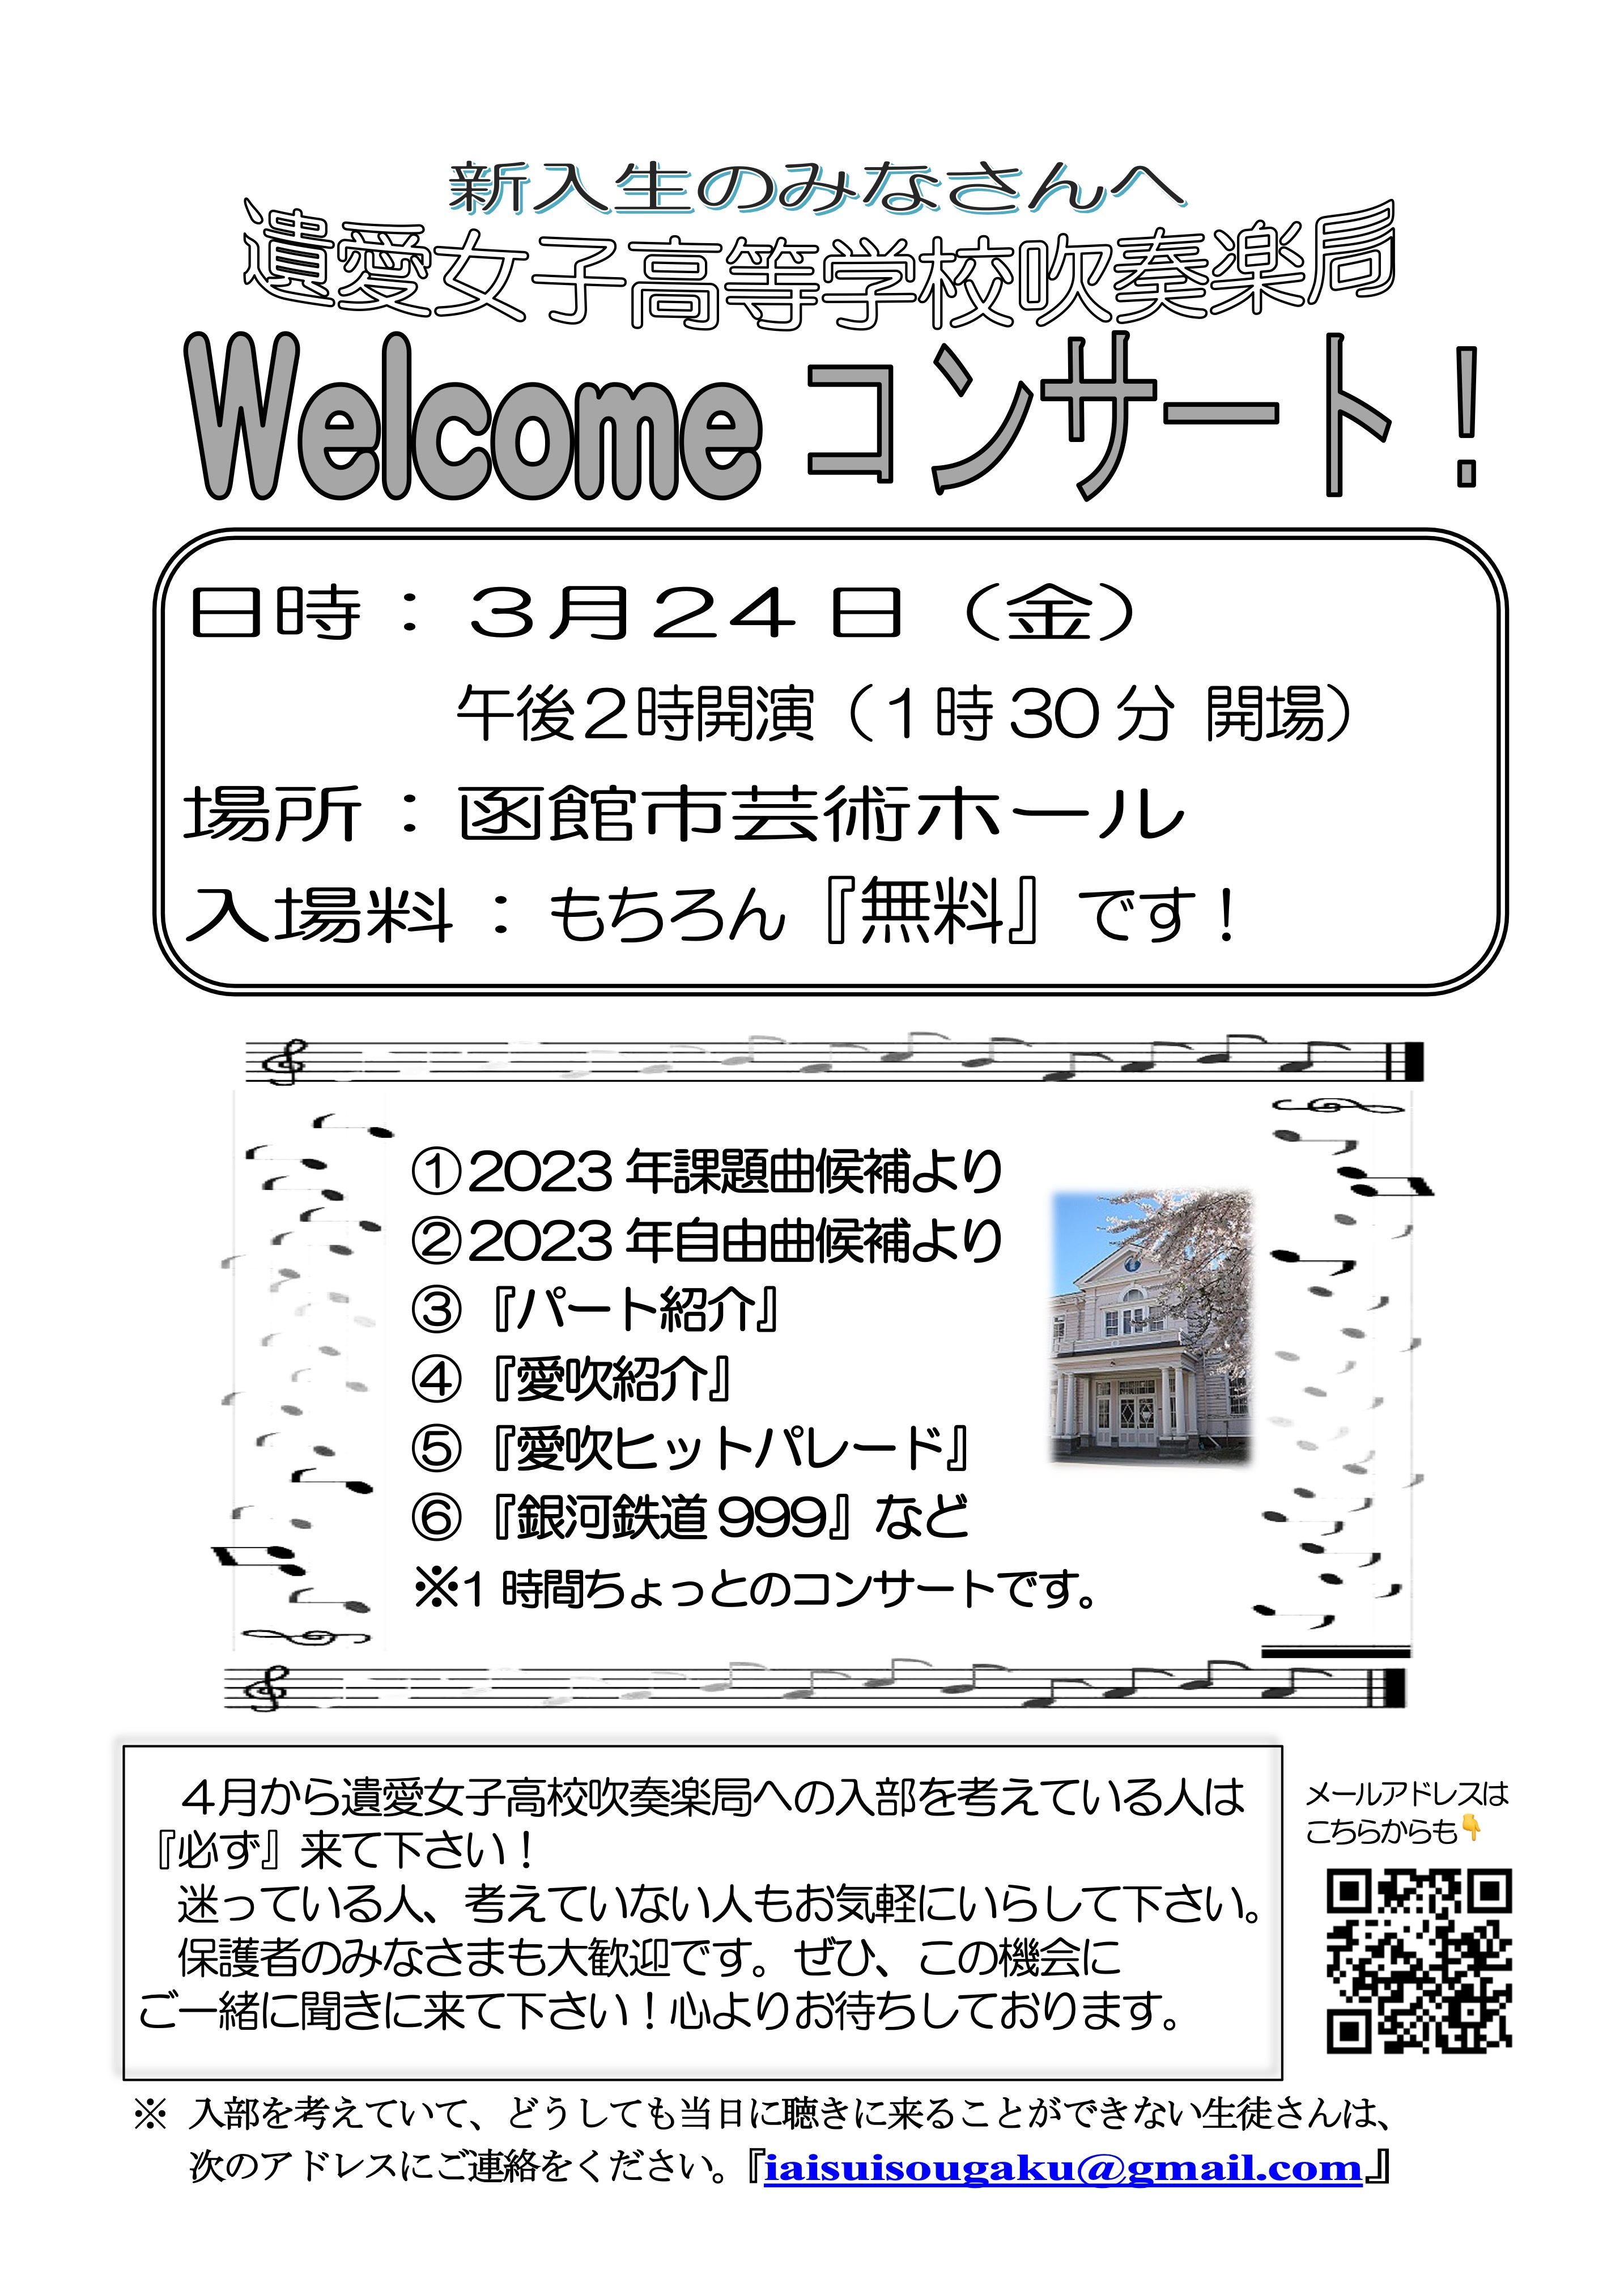 Welcomeコンサート2023ちらし